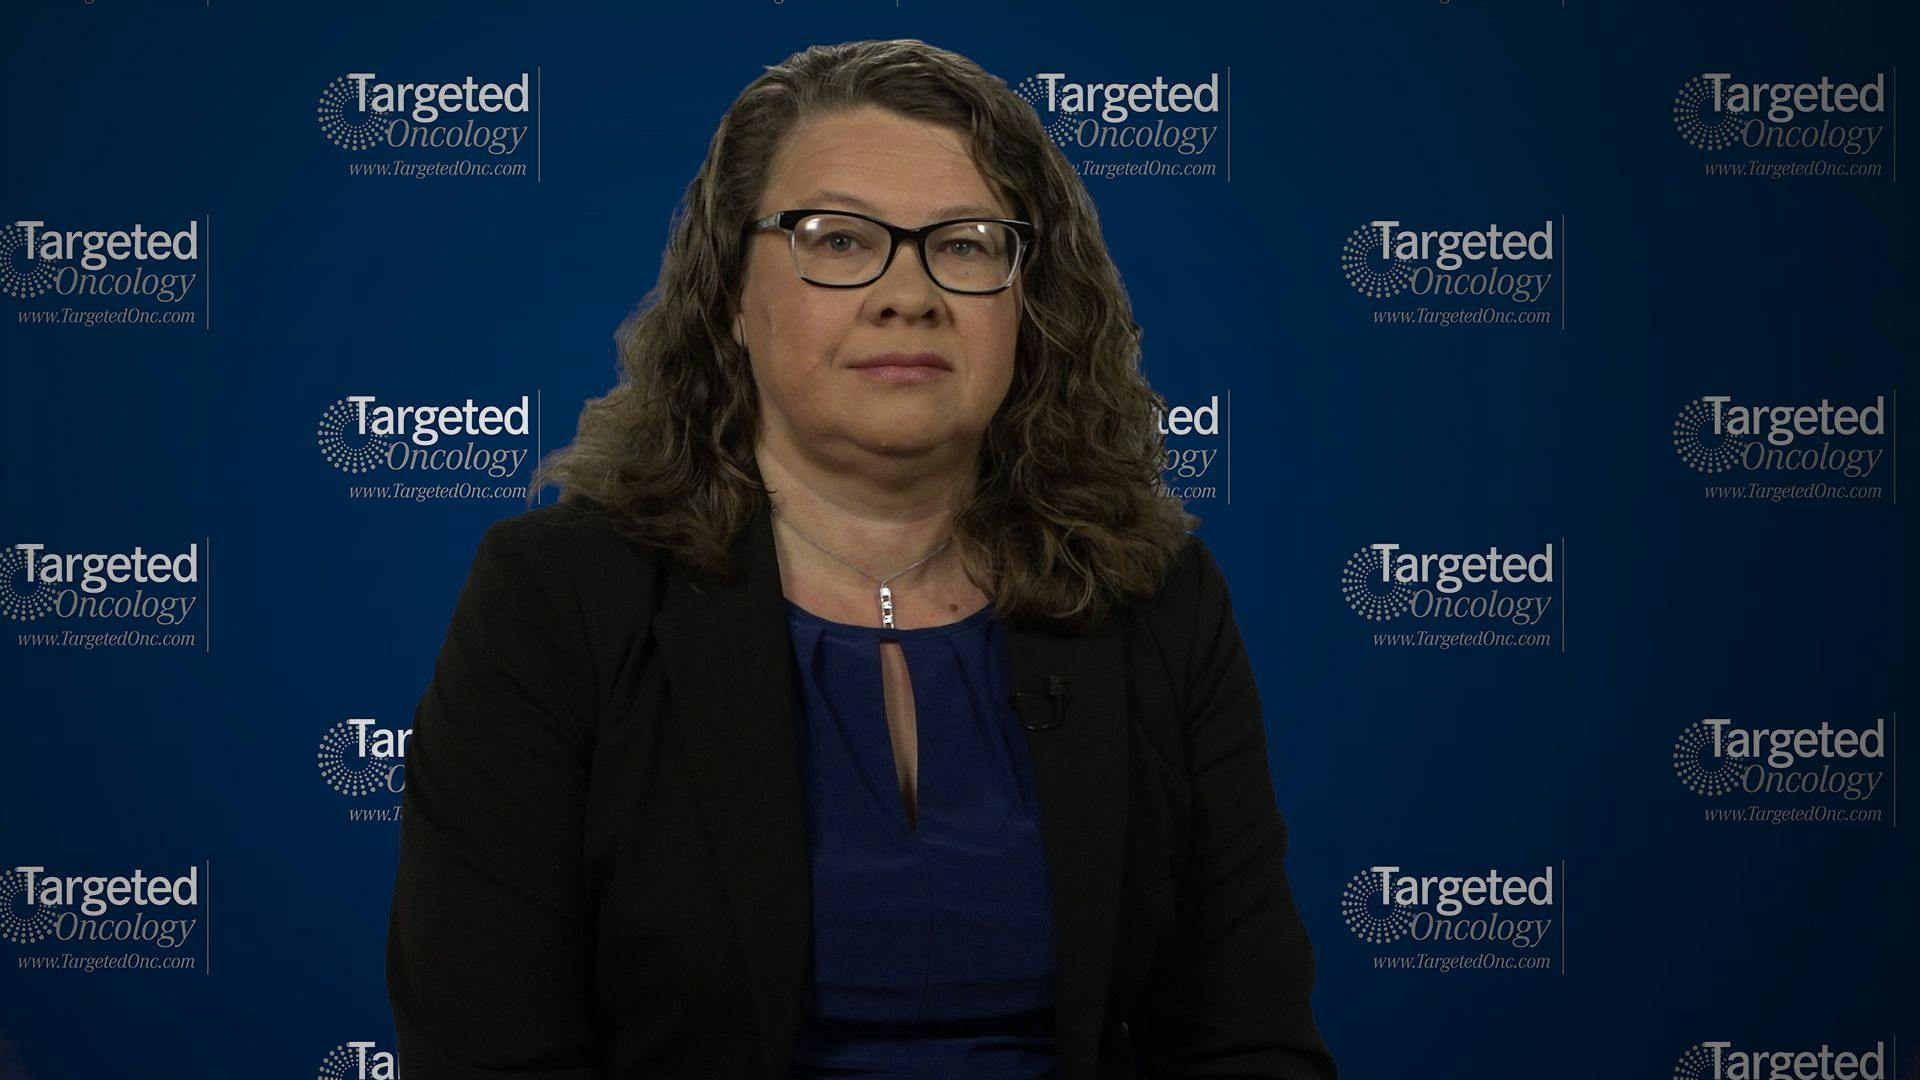 A 50-Year-Old Woman With ALK-Rearranged NSCLC